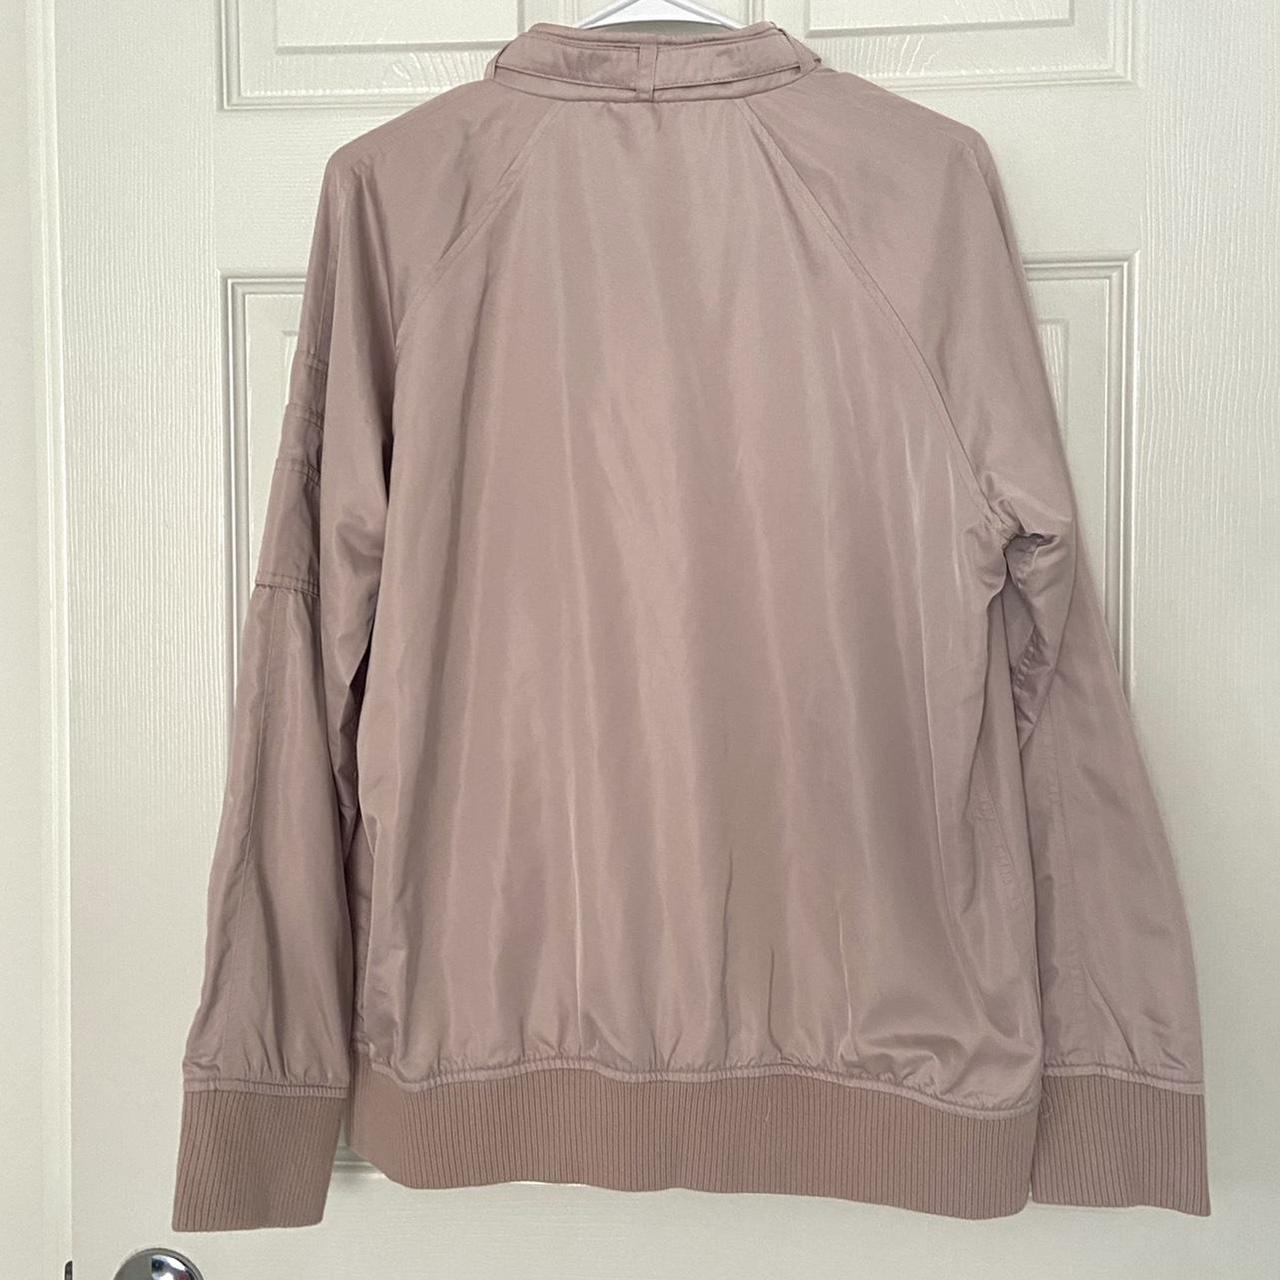 Members Only Women's Pink and Tan Jacket (4)